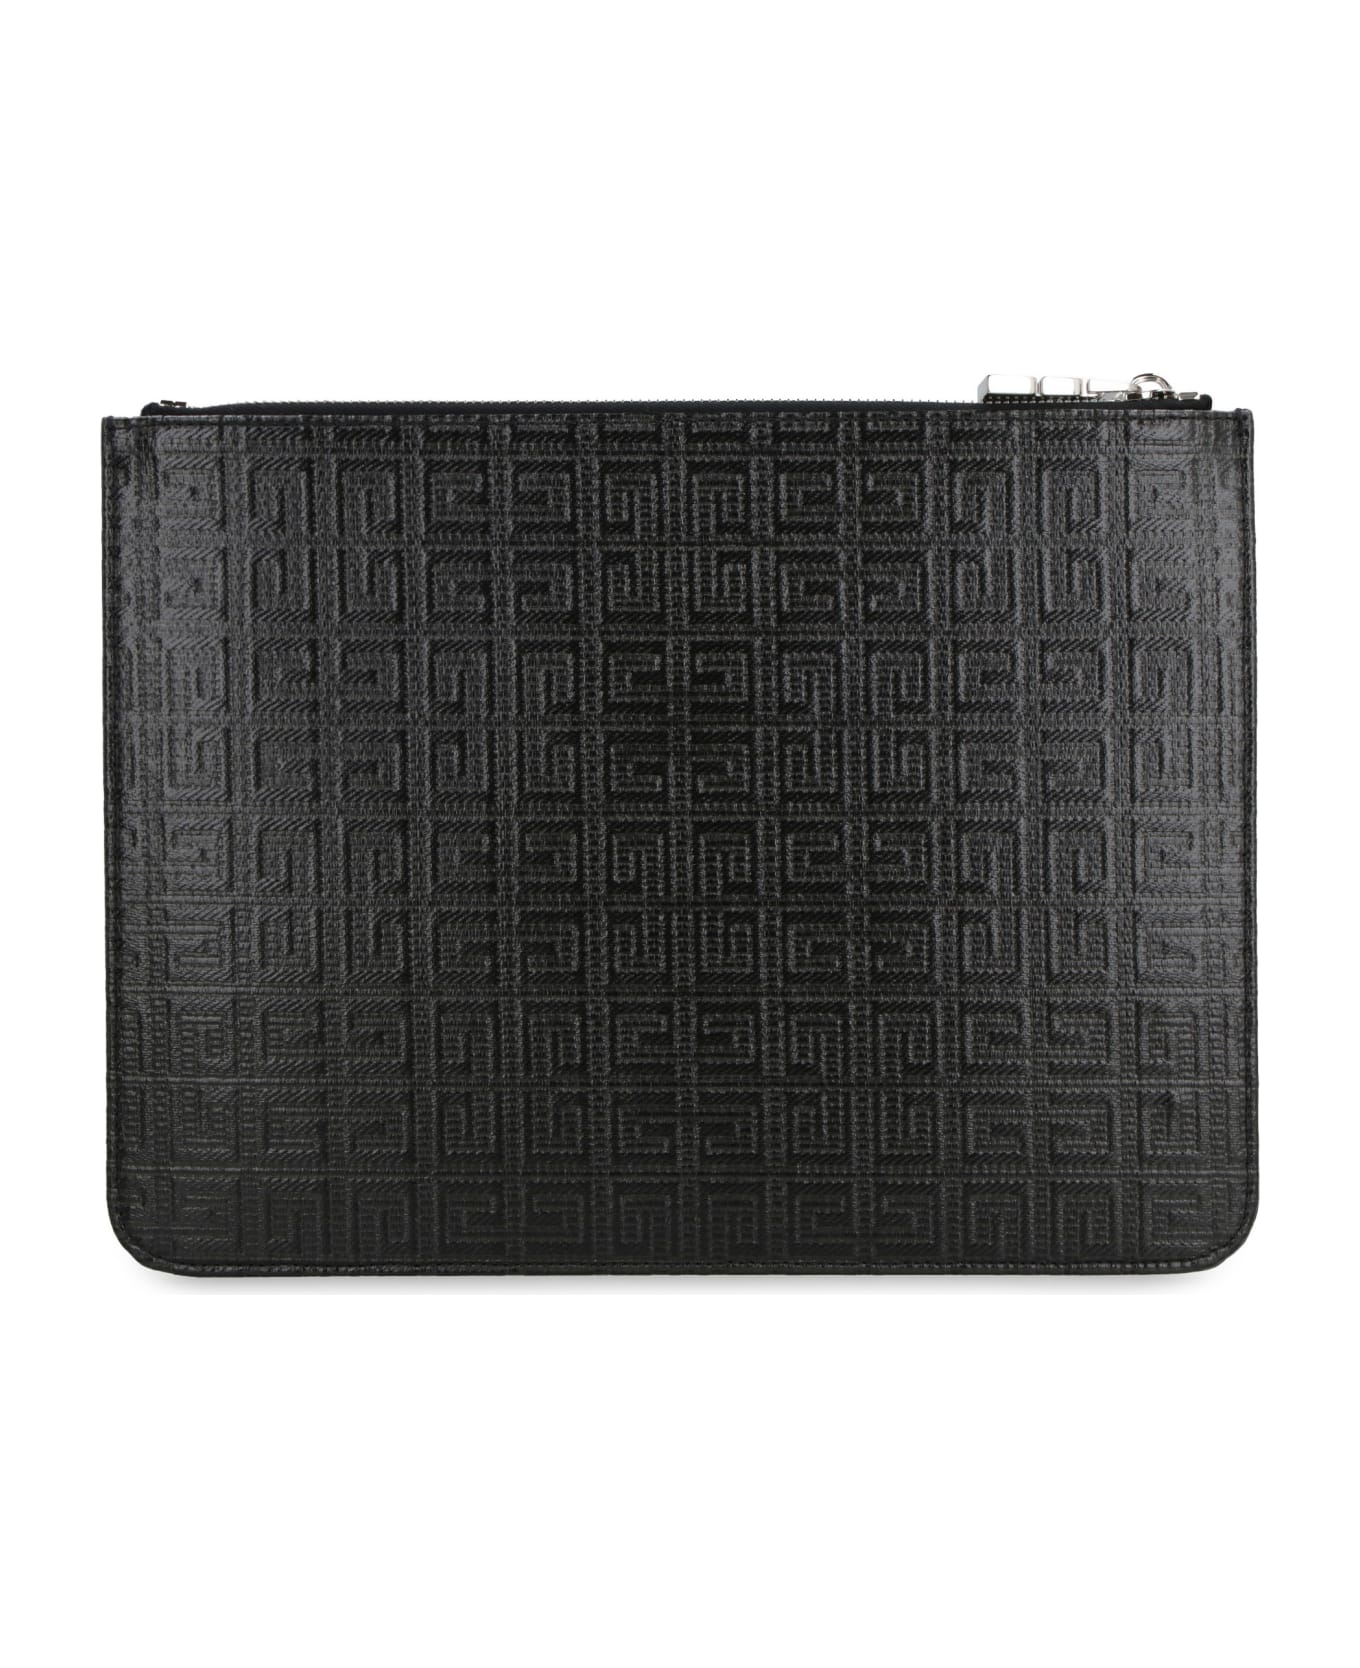 Givenchy 4g Coated Canvas Flat Pouch - Black バッグ